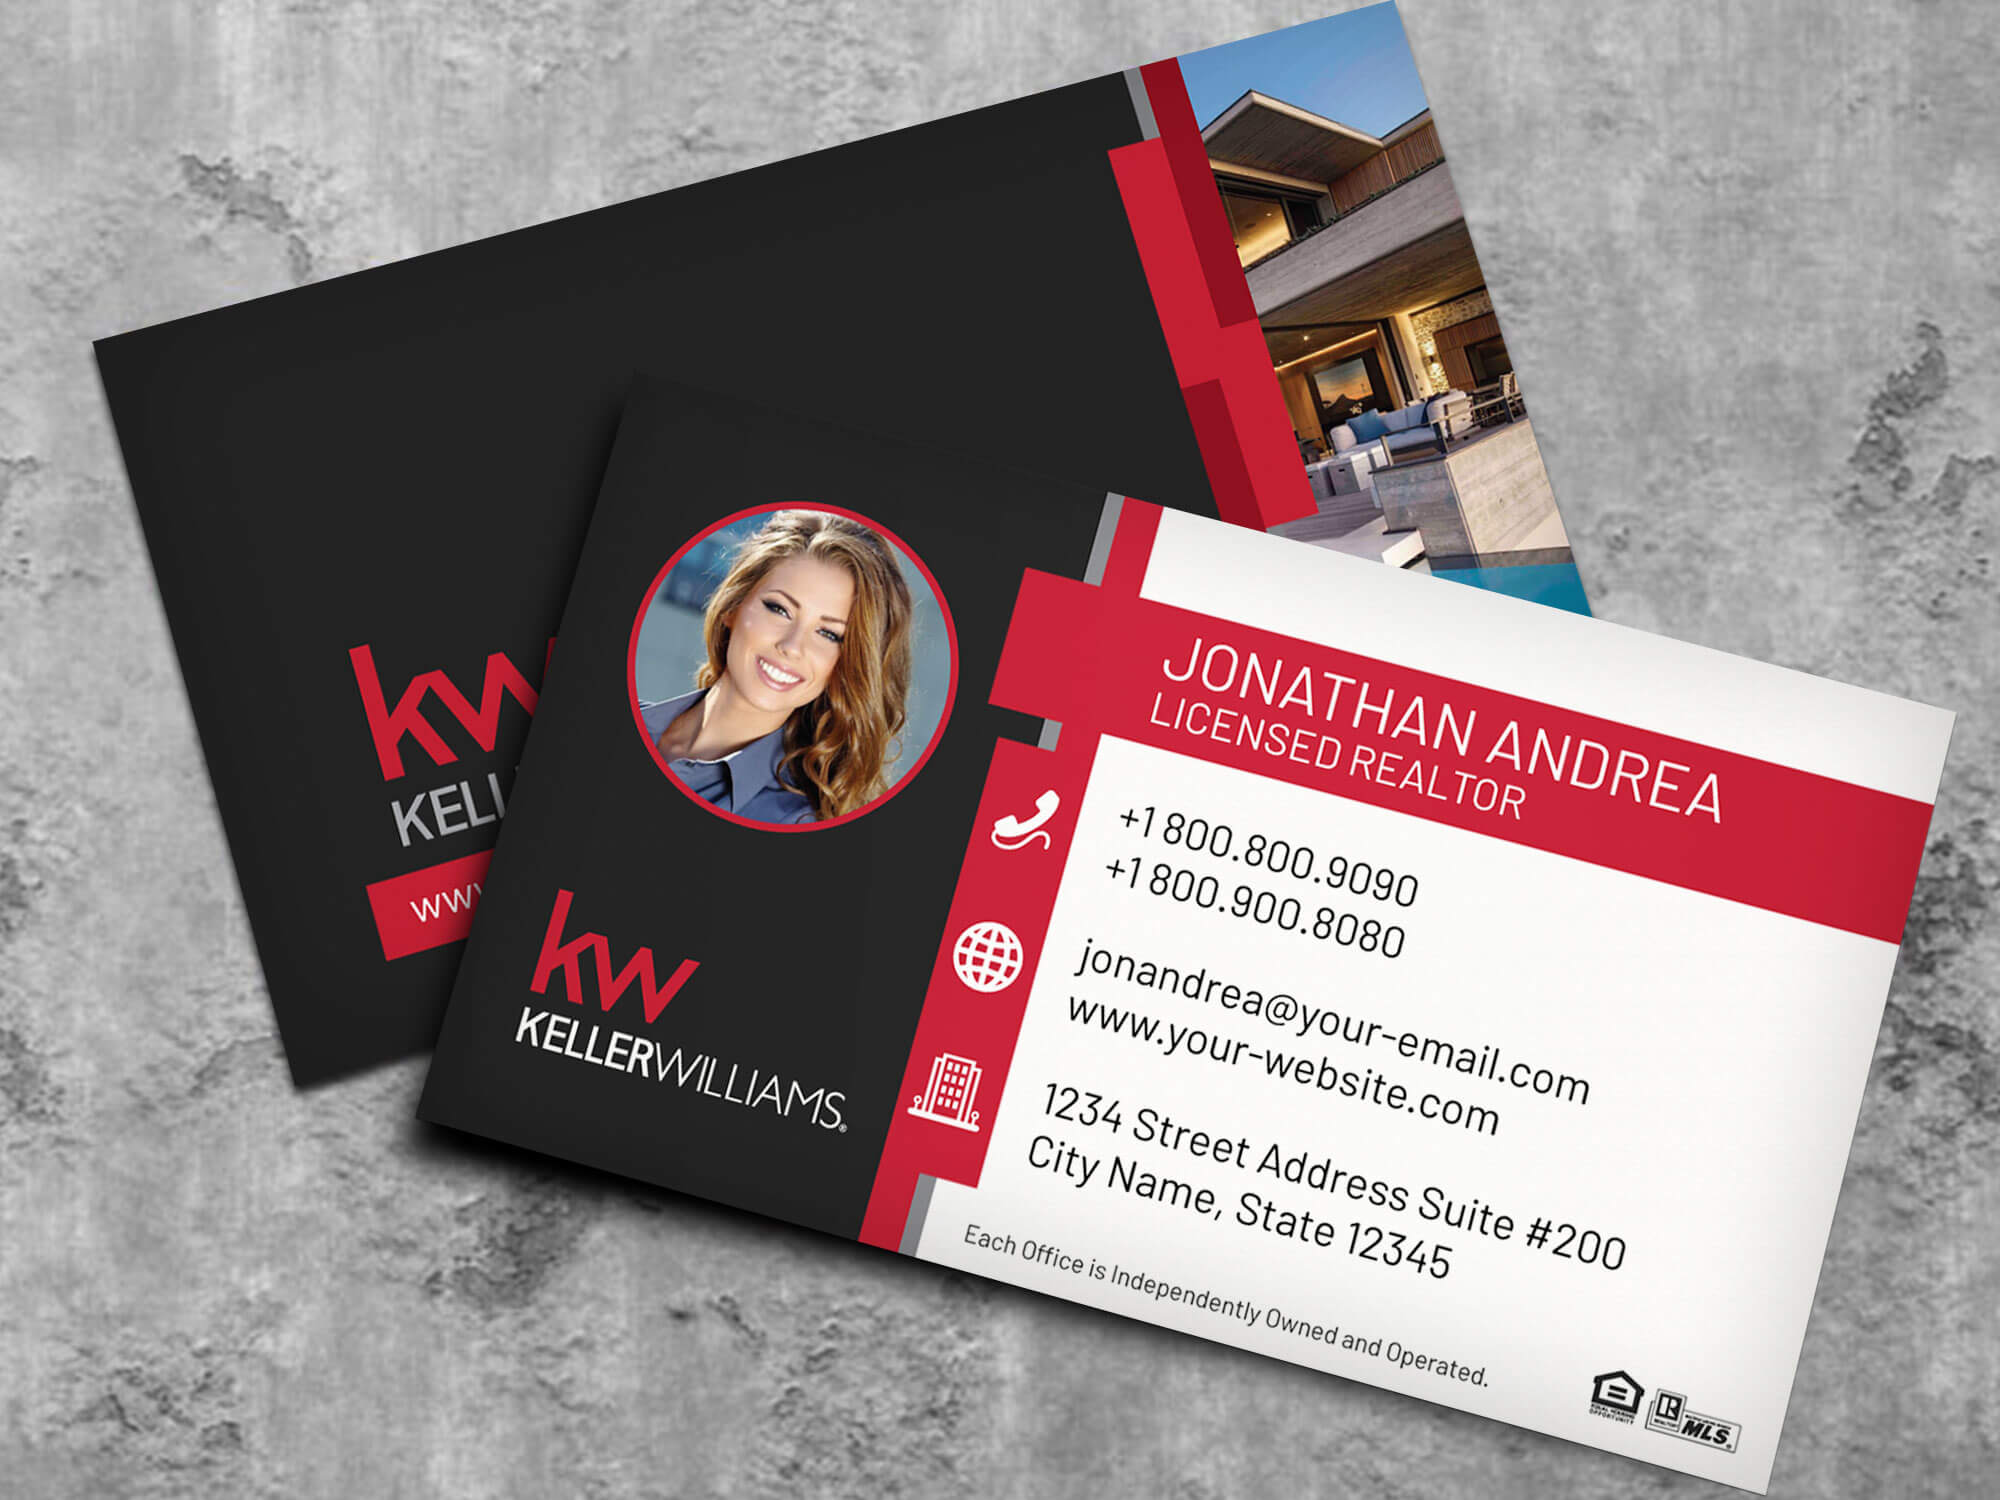 Keller Williams Business Card Template Bc19702Kw - Nusacreative Regarding Keller Williams Business Card Templates